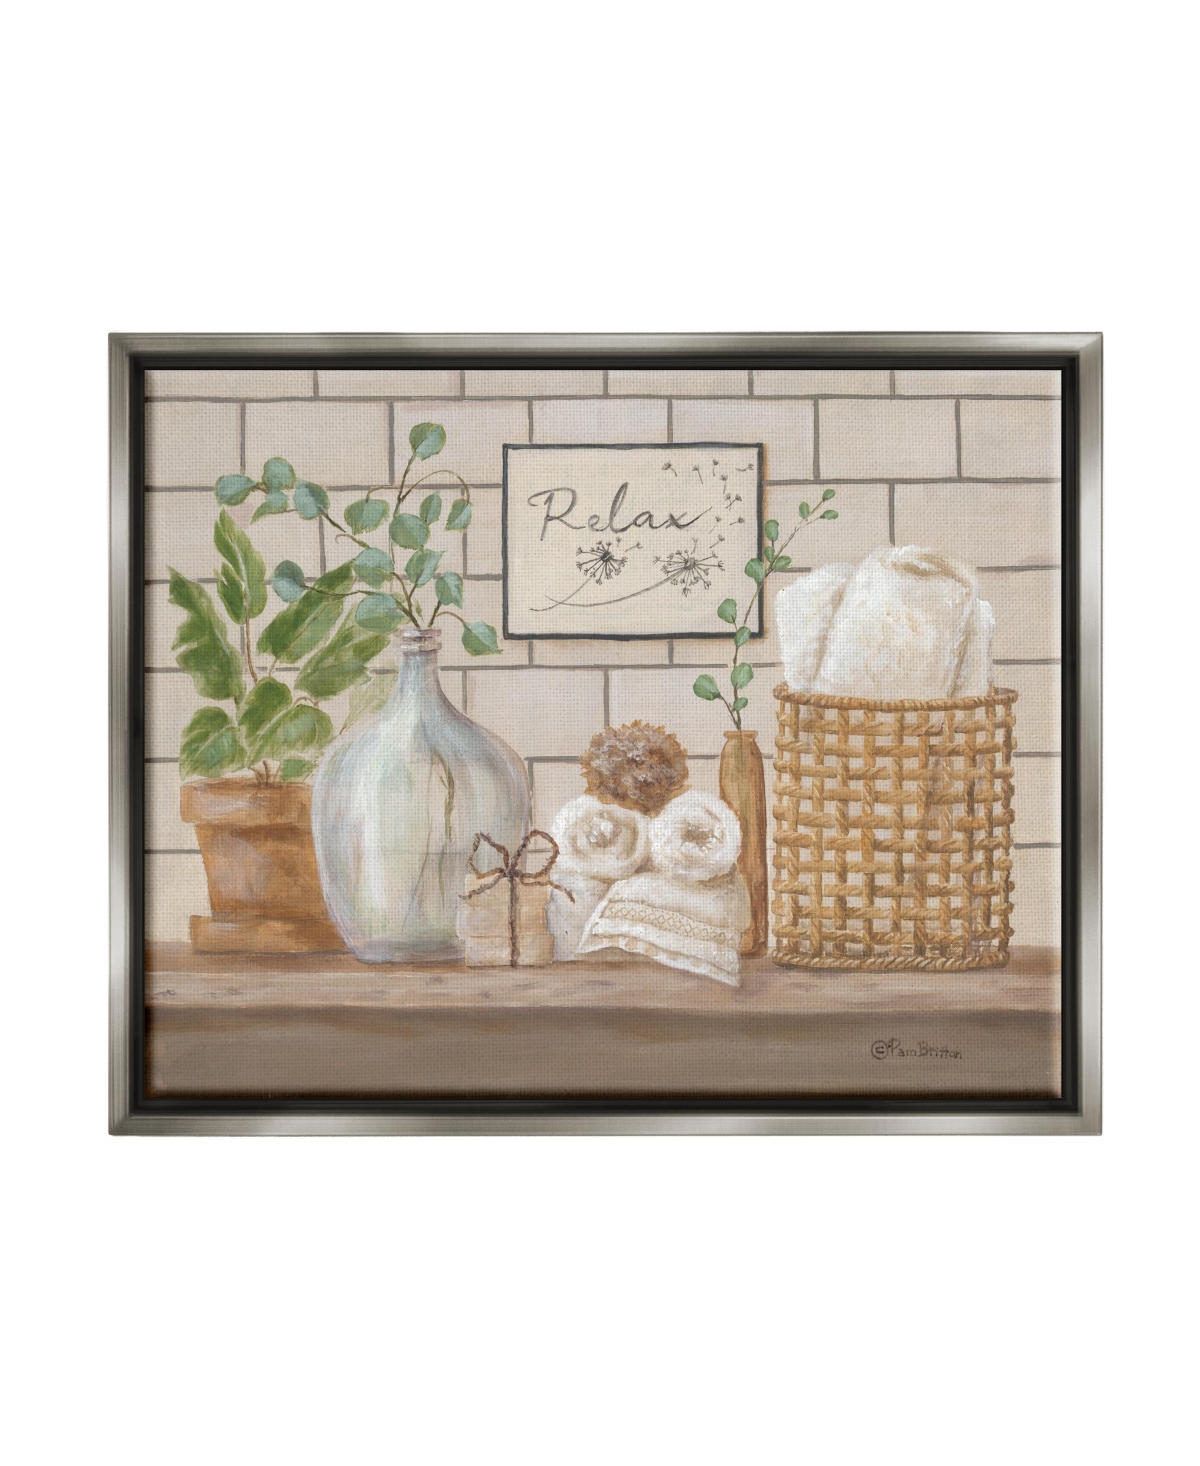 Stupell Industries Relax Uplifting Bathroom Scene Framed Floater Canvas Wall Art, 17" X 1.7" X 21" In Multi-color